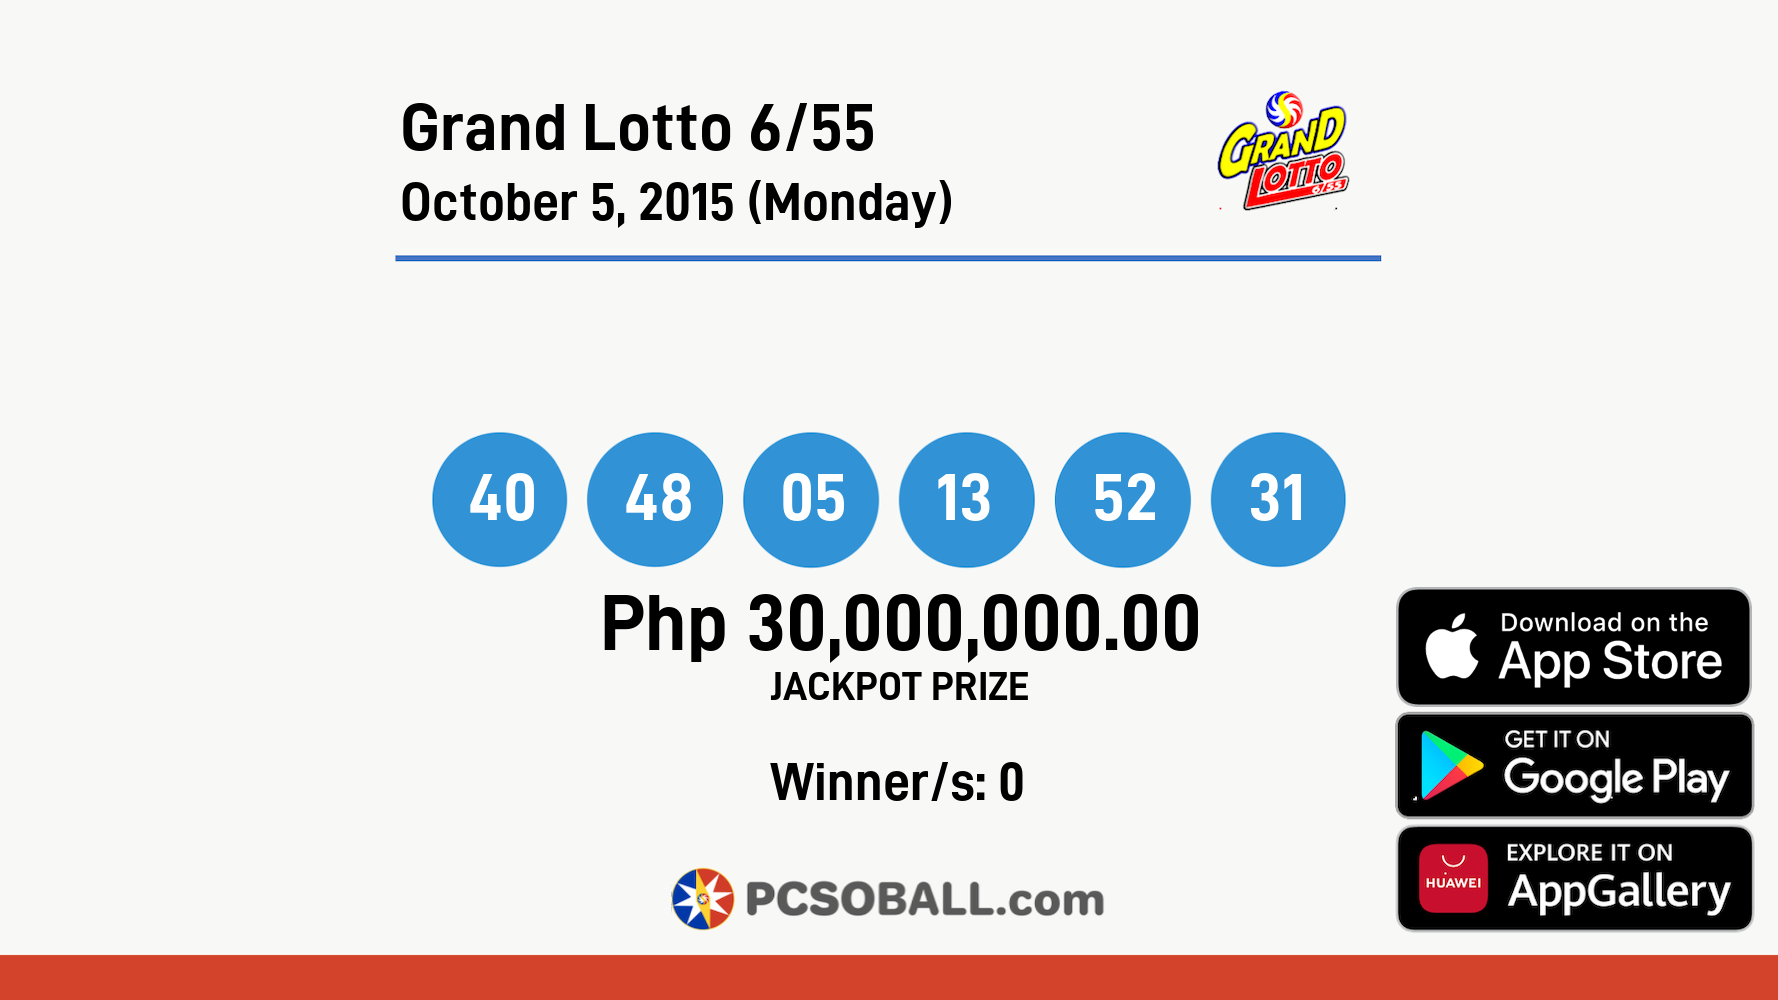 Grand Lotto 6/55 October 5, 2015 (Monday) Result